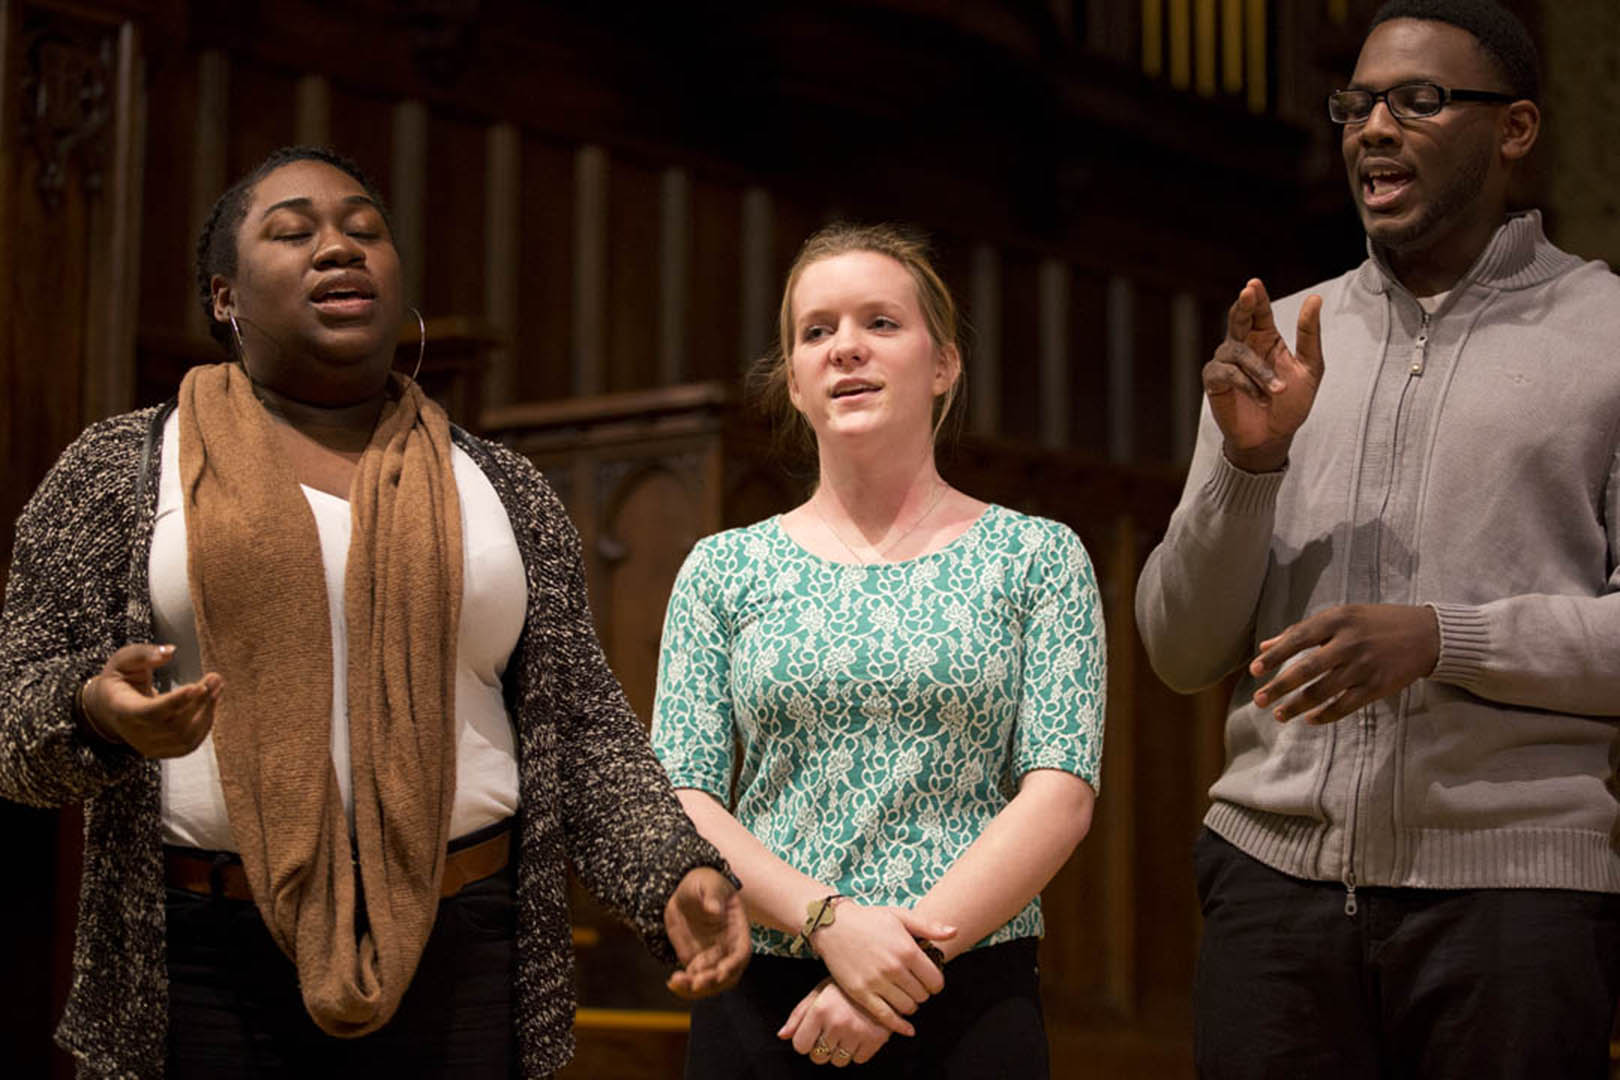 Members of the Gospelaires perform during Bates' 2014 Martin Luther King Jr. Memorial Service in January.